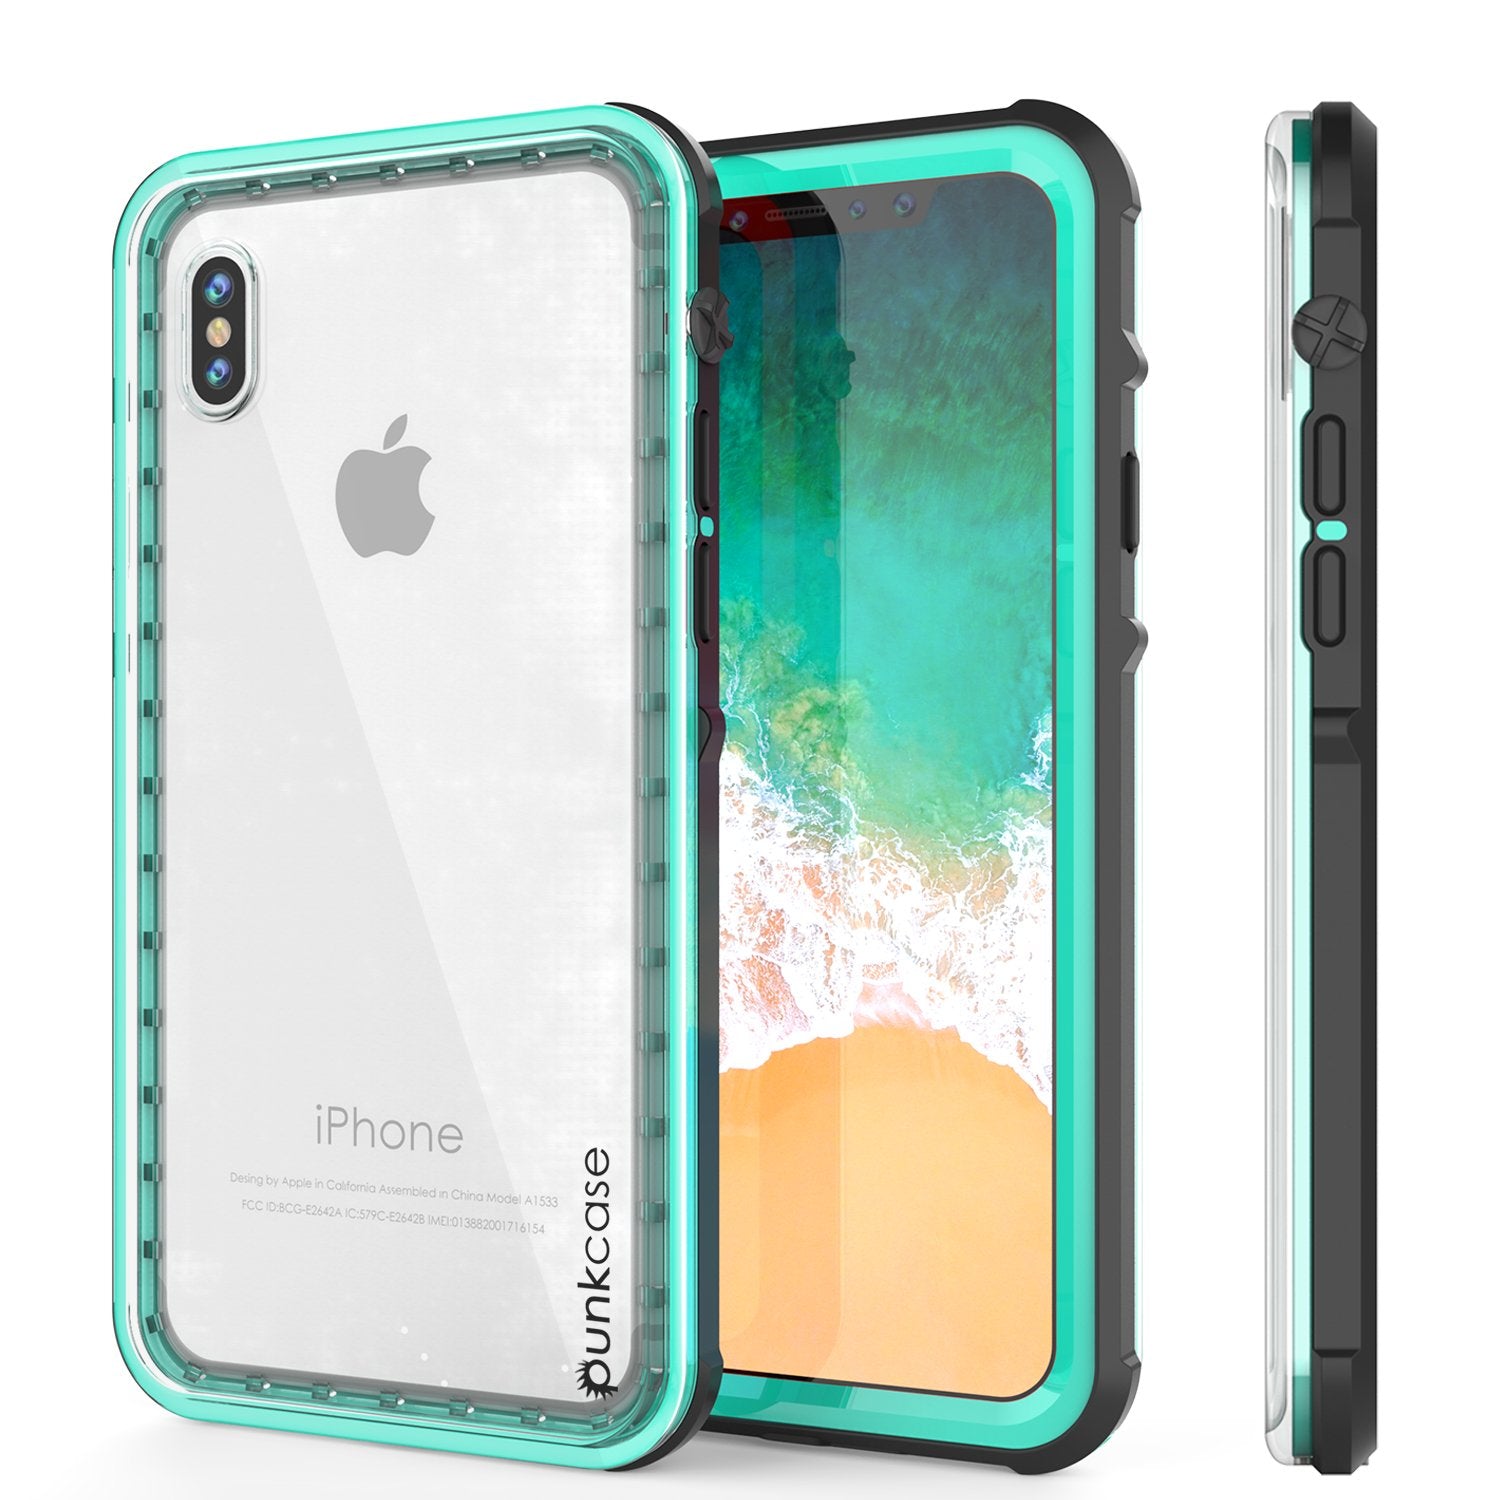 iPhone X Punkcase CRYSTAL SERIES Cover W/Screen Protector, [Teal]